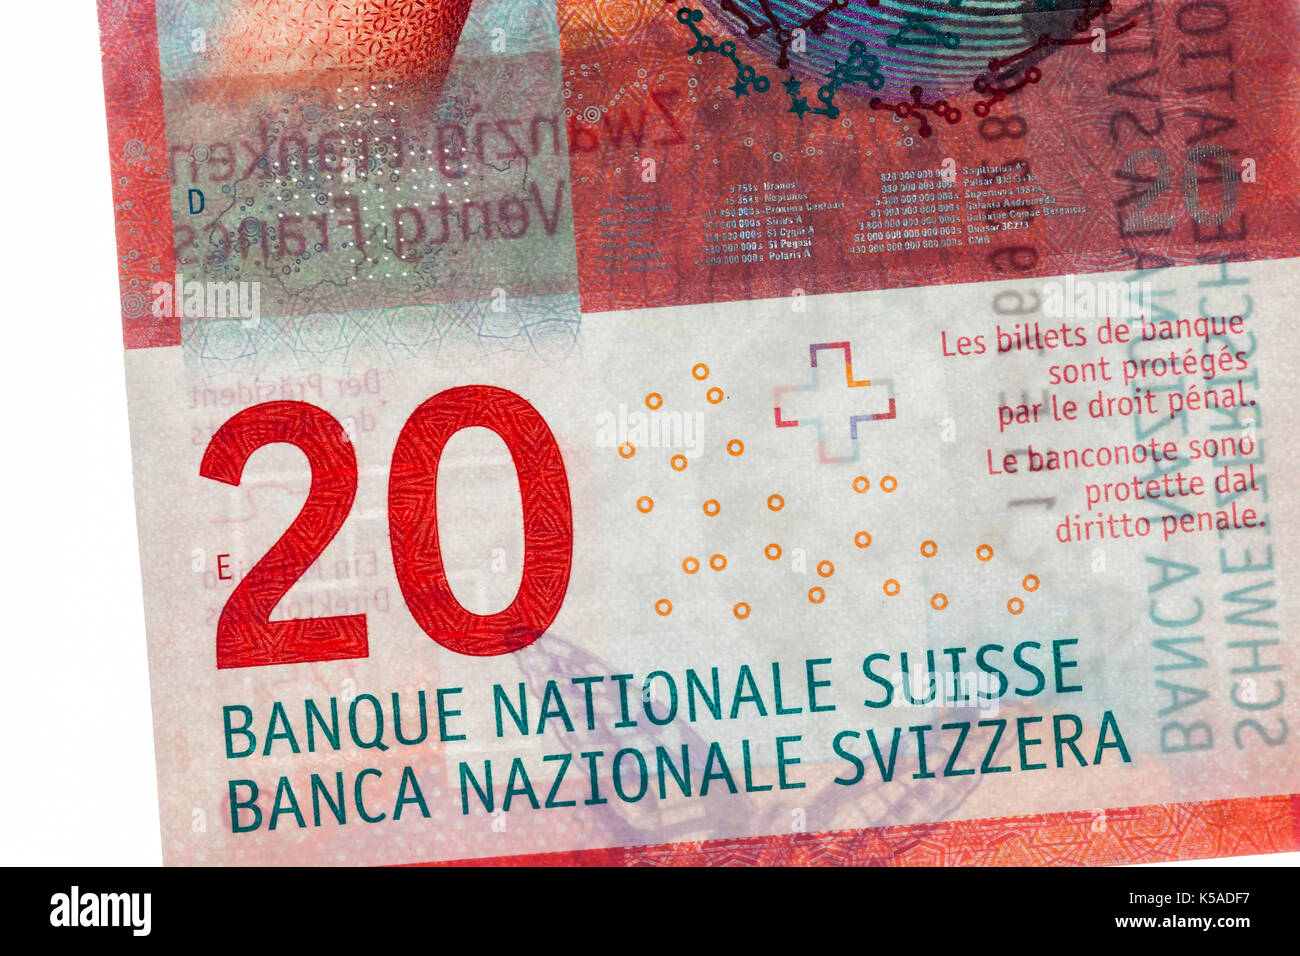 Bern, Switzerland:   Money of Switzerland. New 20- and 50-franc notes, which were introduced in 2017. Stock Photo